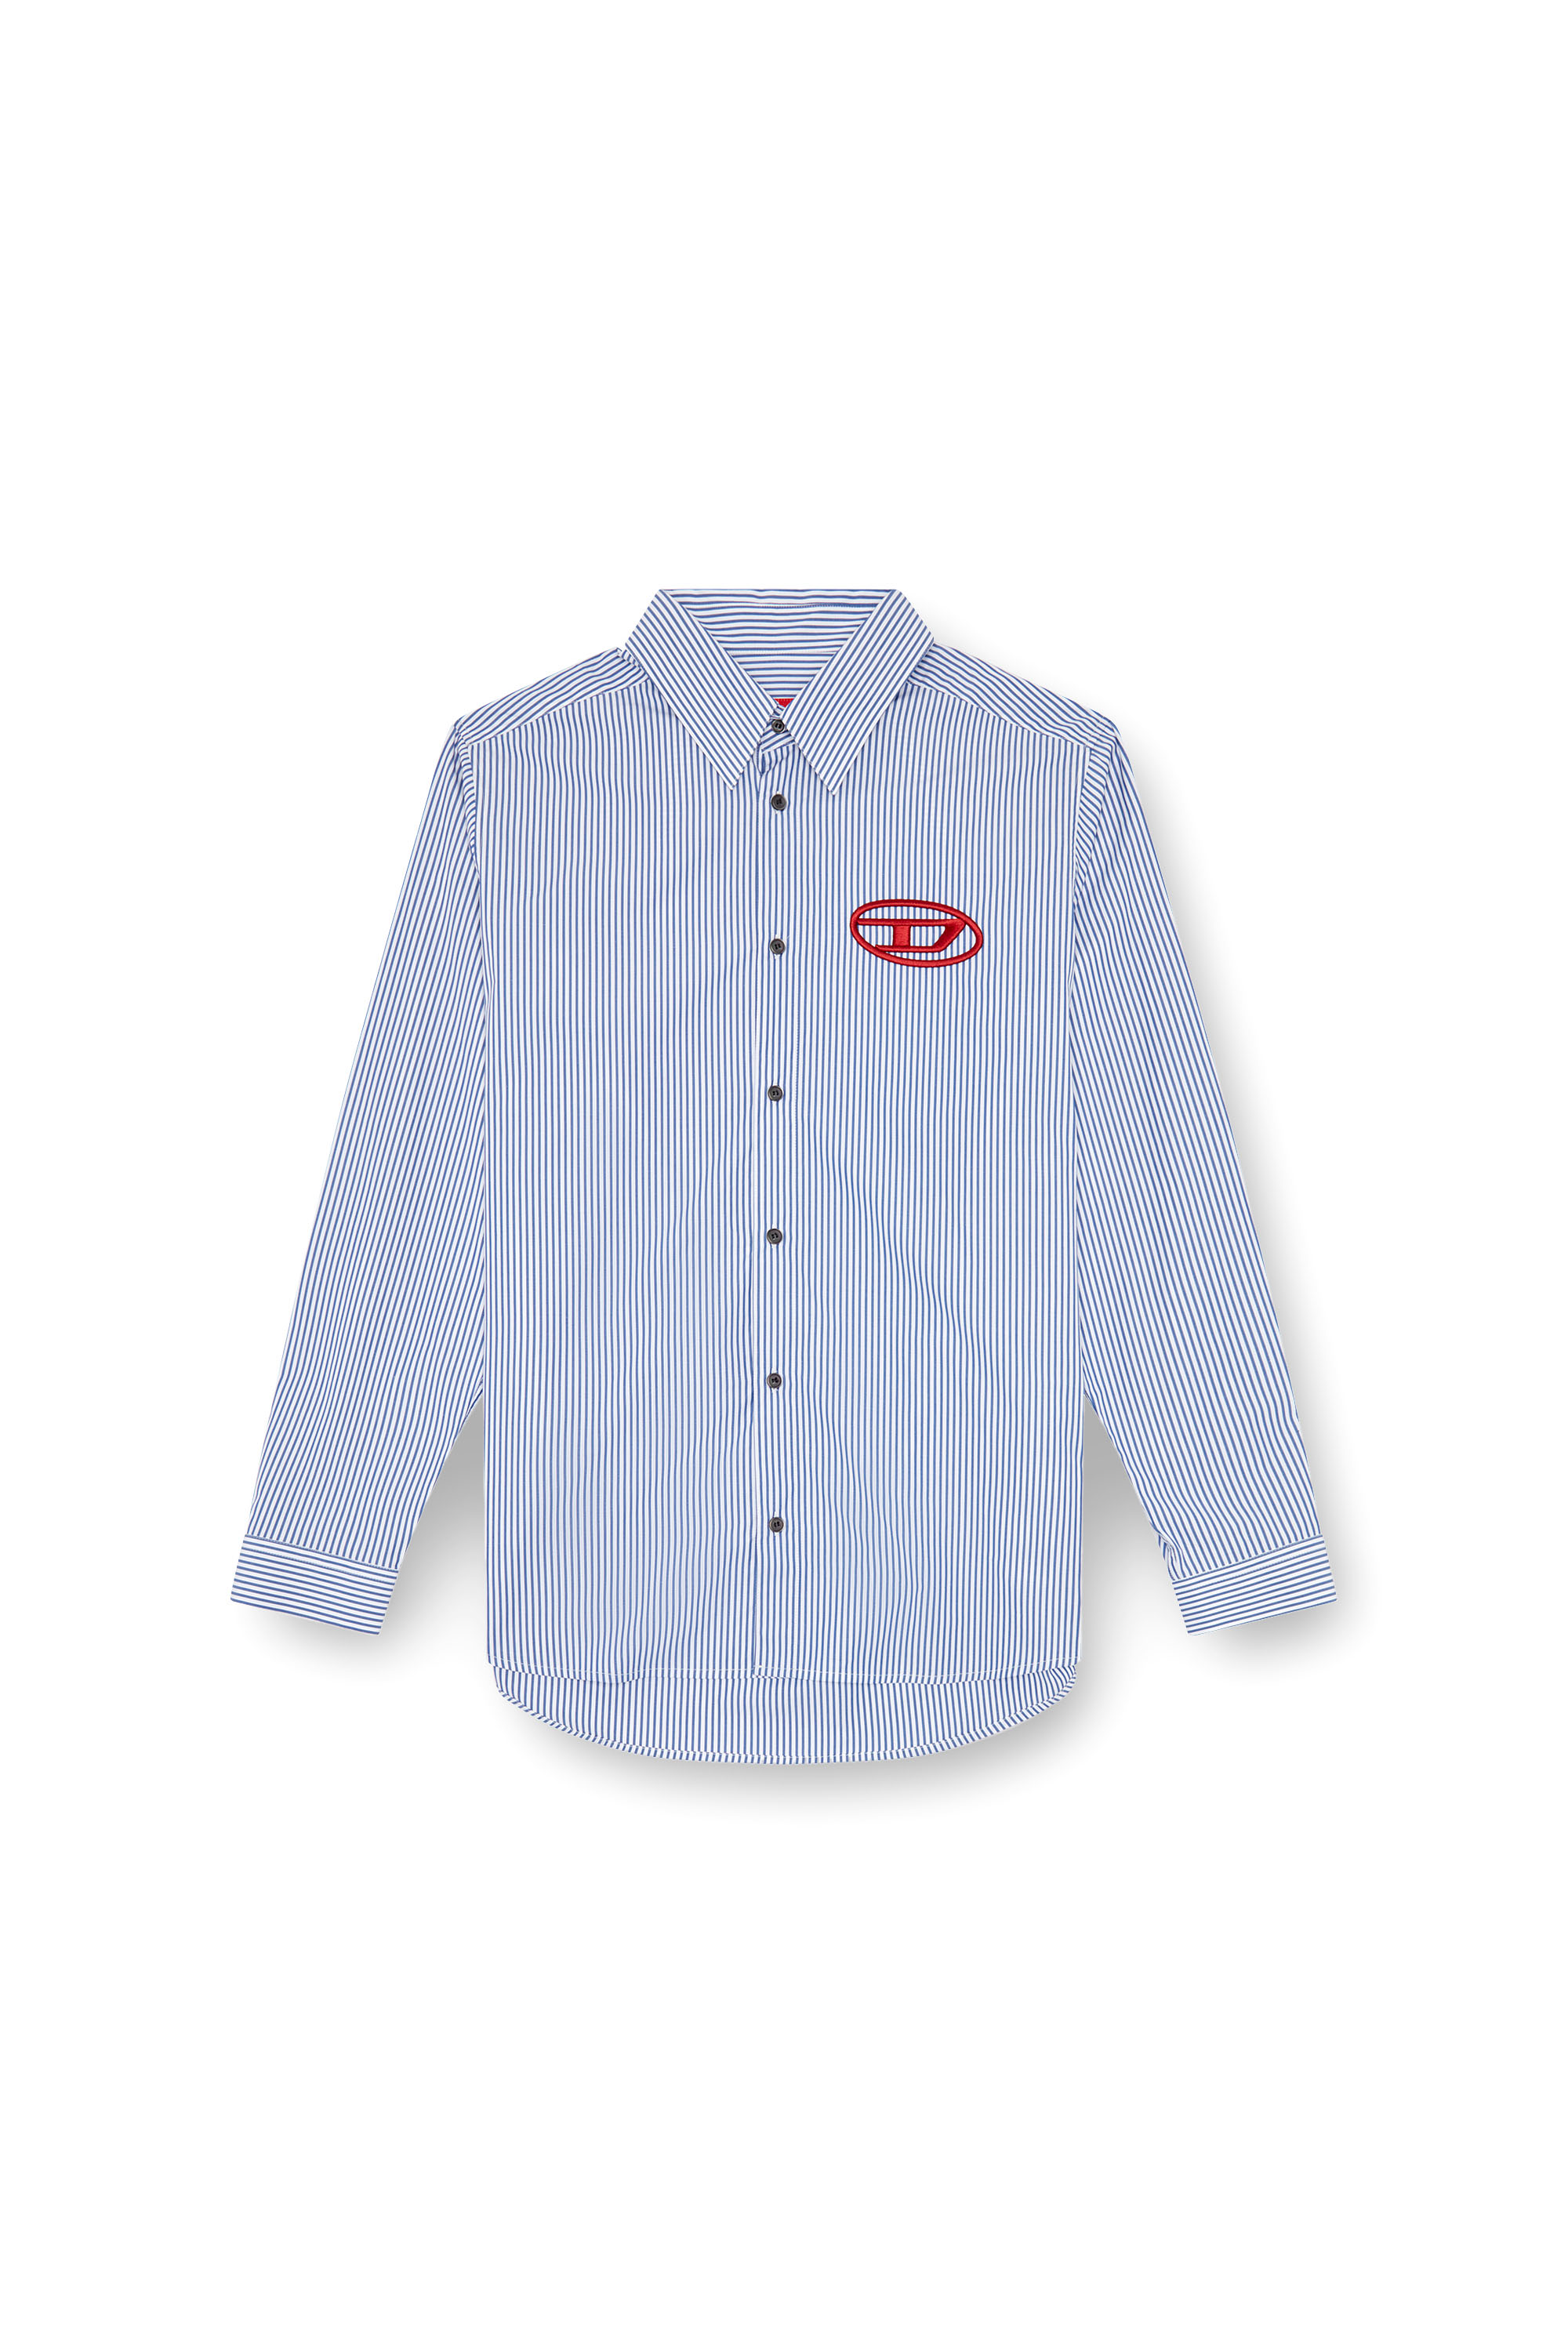 Diesel - S-SIMPLY-E, Man Striped shirt with Oval D embroidery in Blue - Image 4